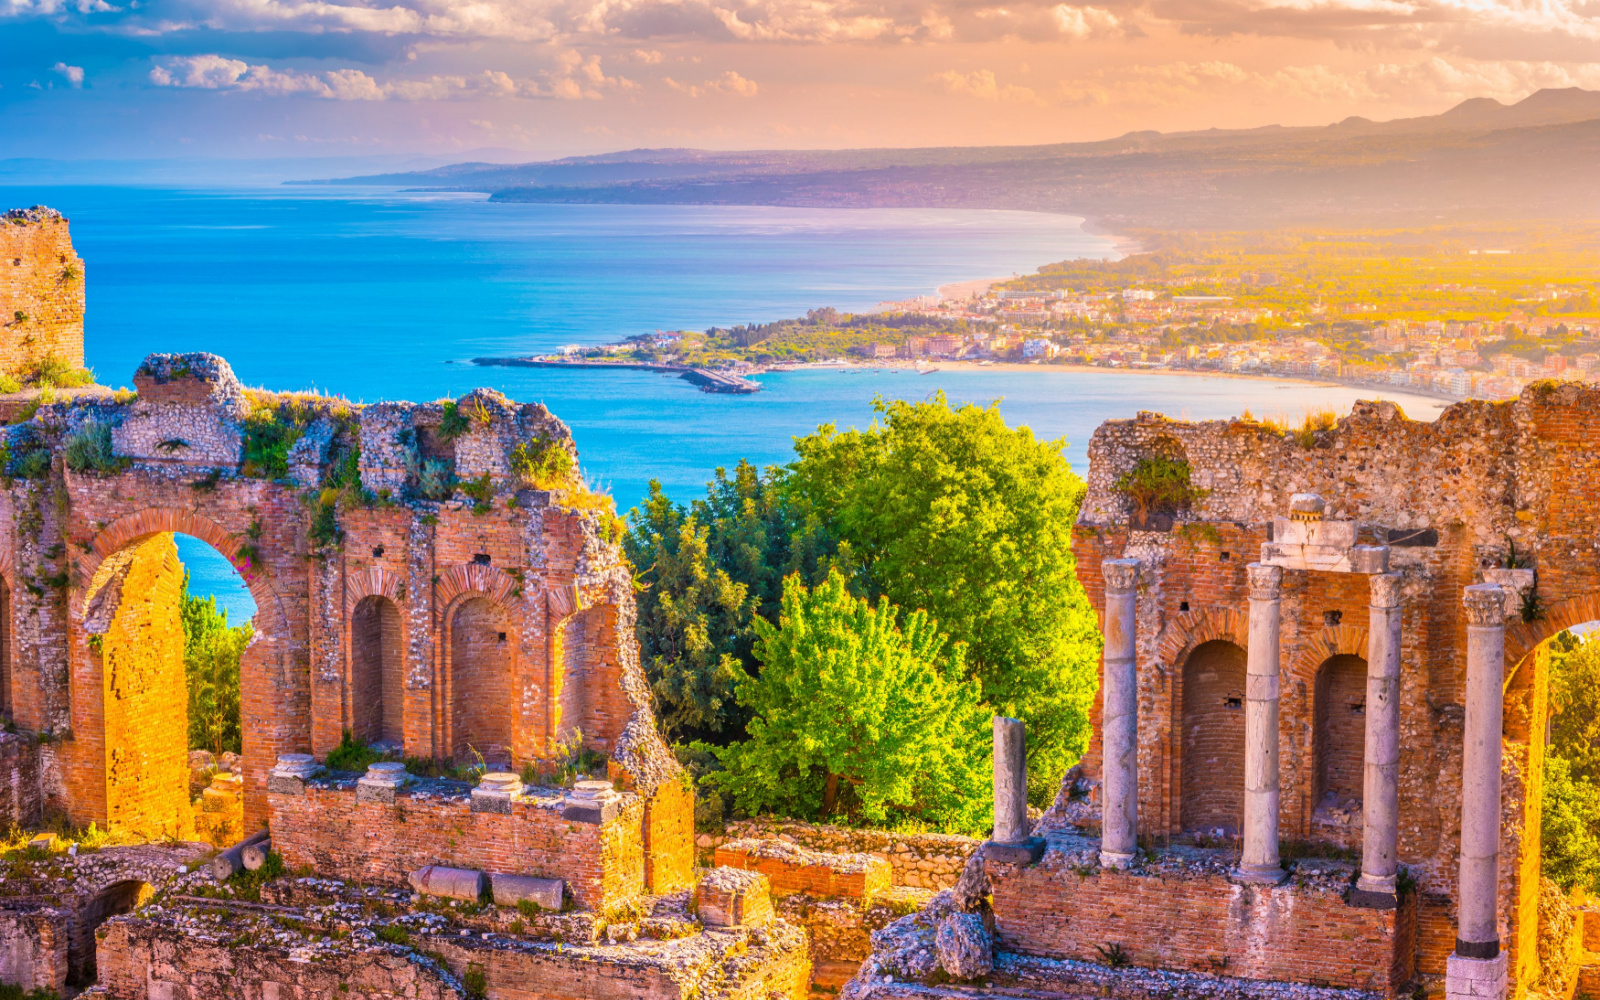 The 16 Best Places to Visit in Sicily in 2023